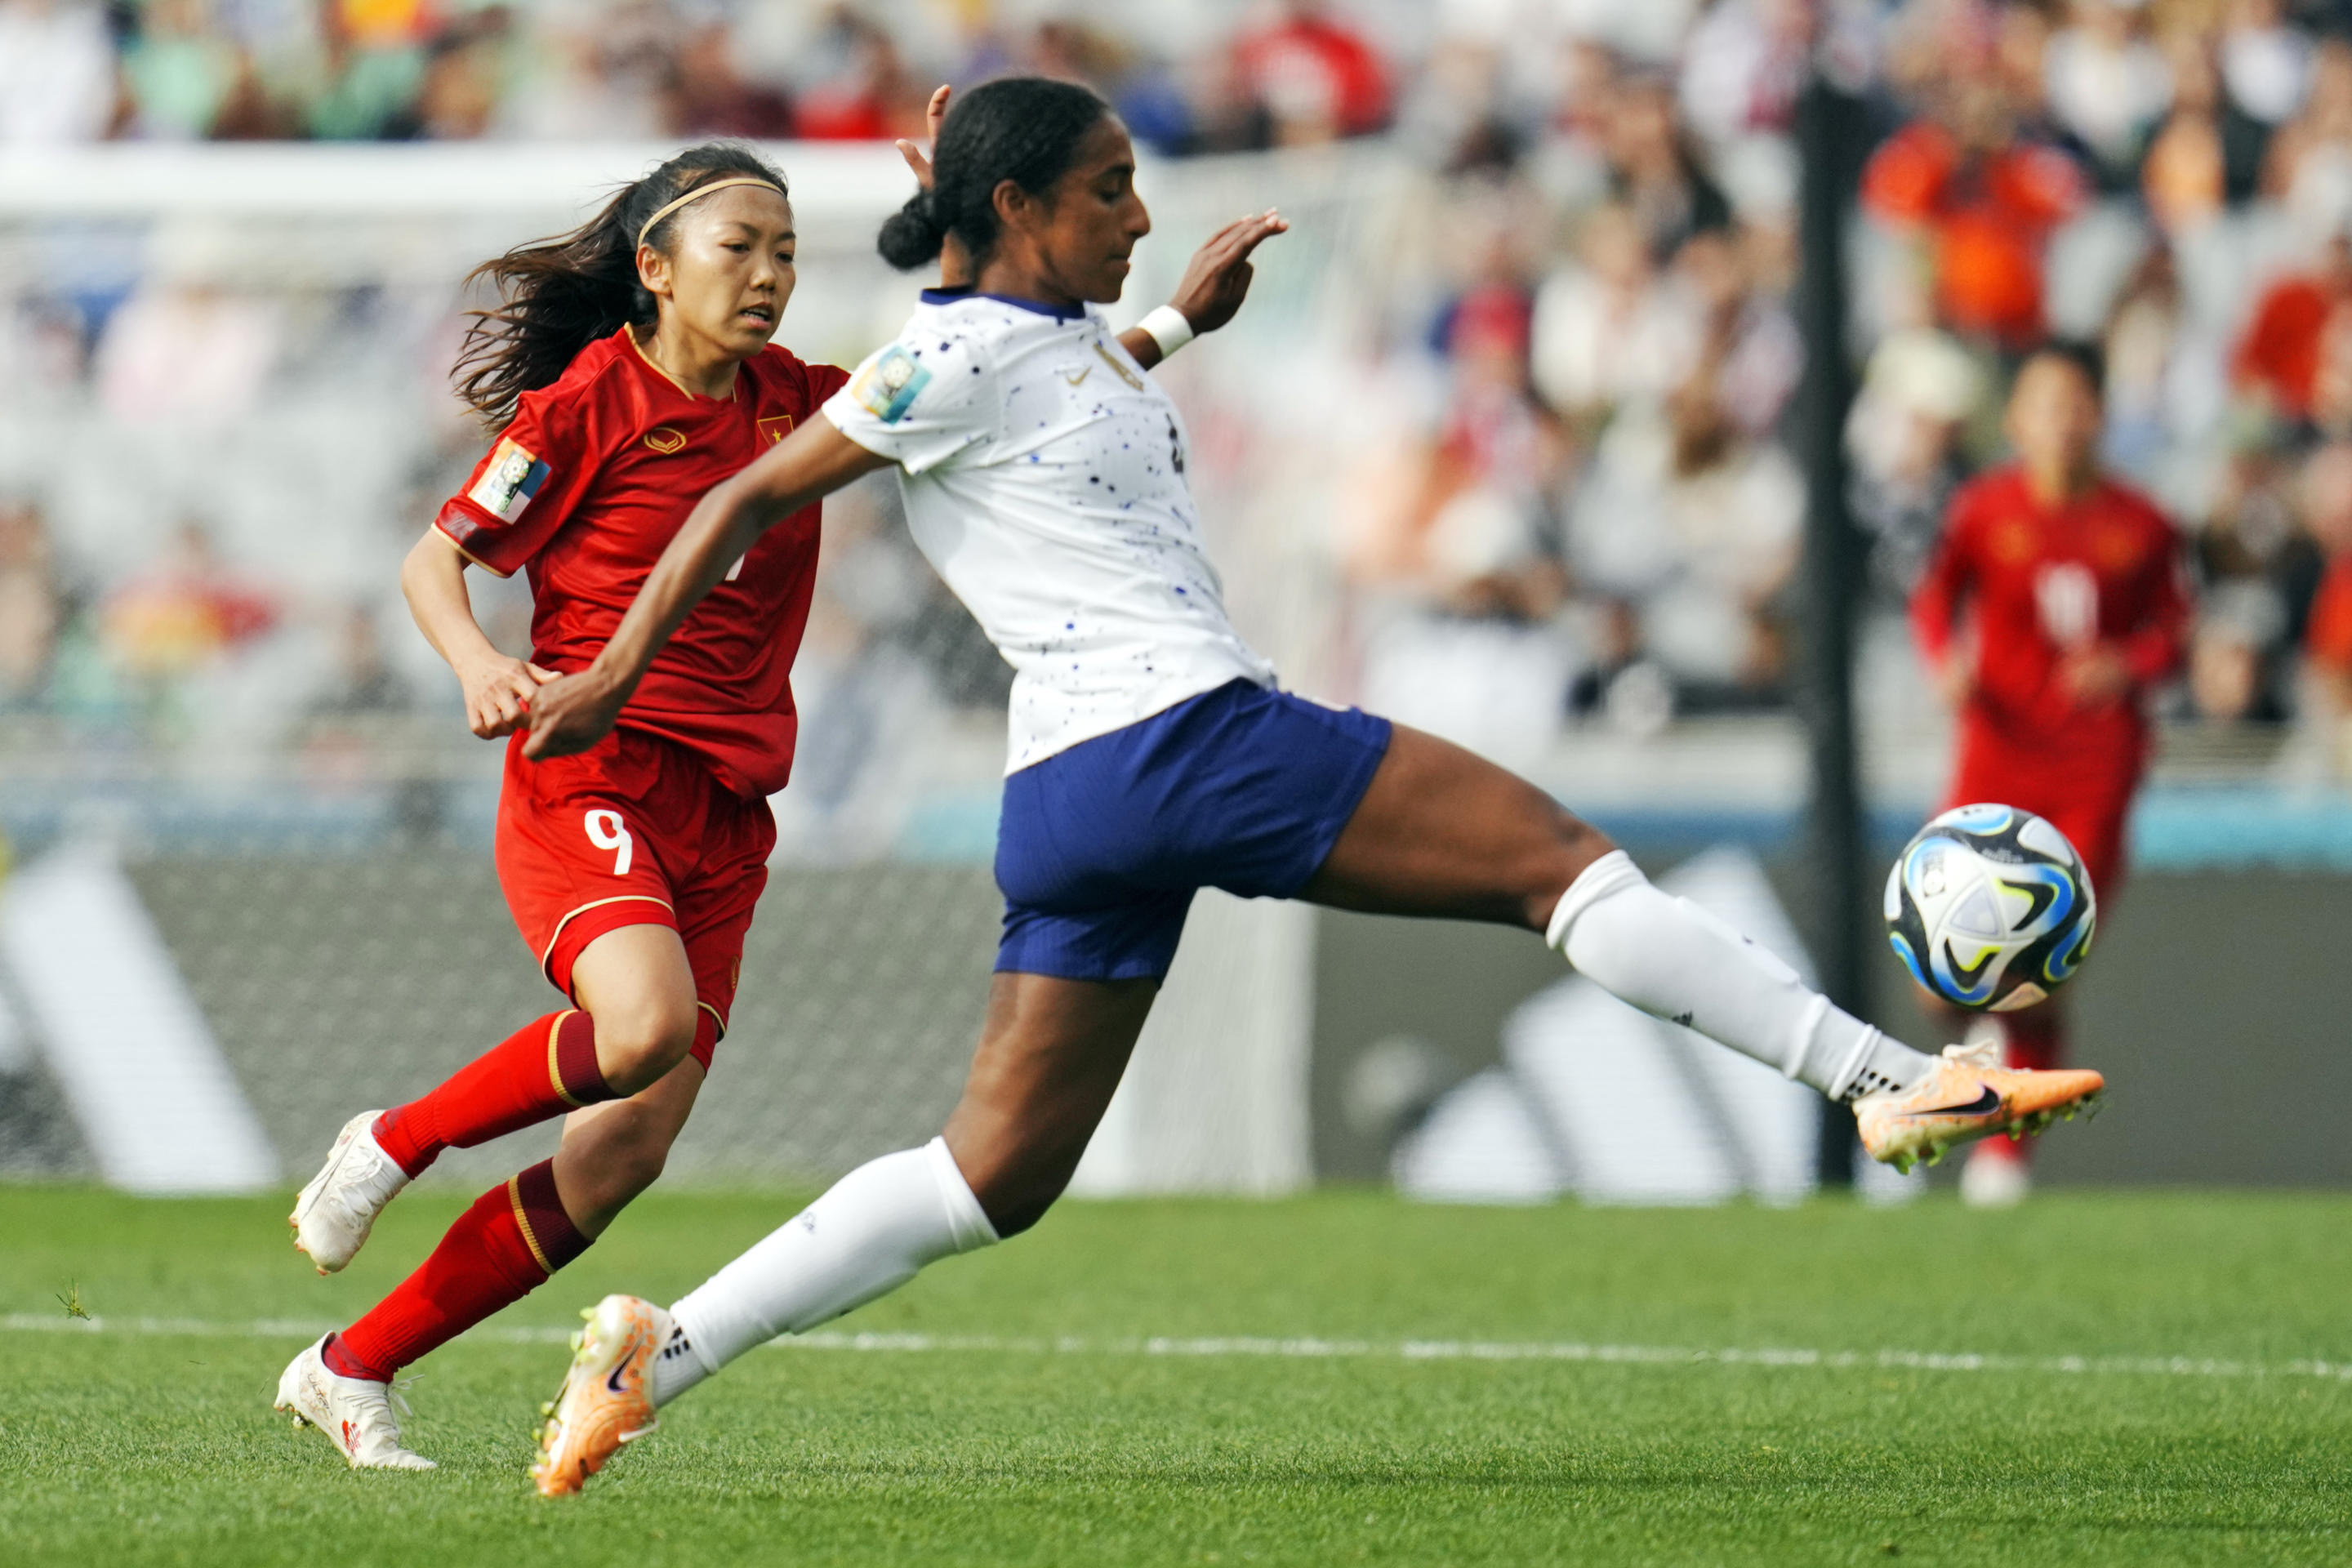 United States' Naomi Girma, front, controls the ball as Vietnam's Nhu Huynh (9) chases during the first half of the Women's World Cup Group E soccer match between the United States and Vietnam at Eden Park in Auckland, New Zealand, Saturday, July 22, 2023. (AP Photo/Abbie Parr)